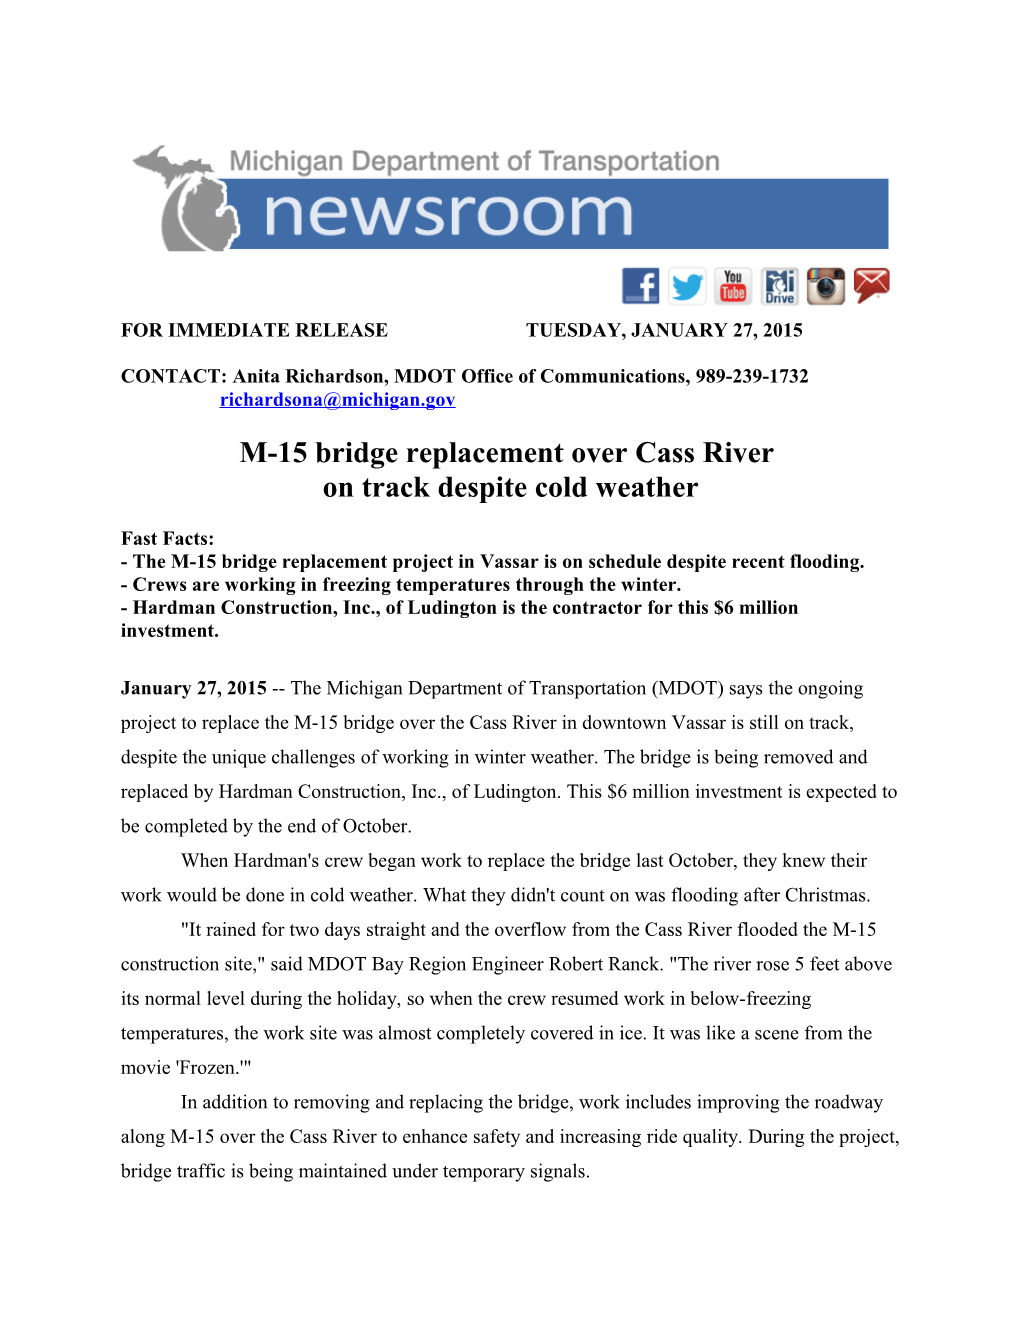 For Immediate Release Tuesday, January 27, 2015